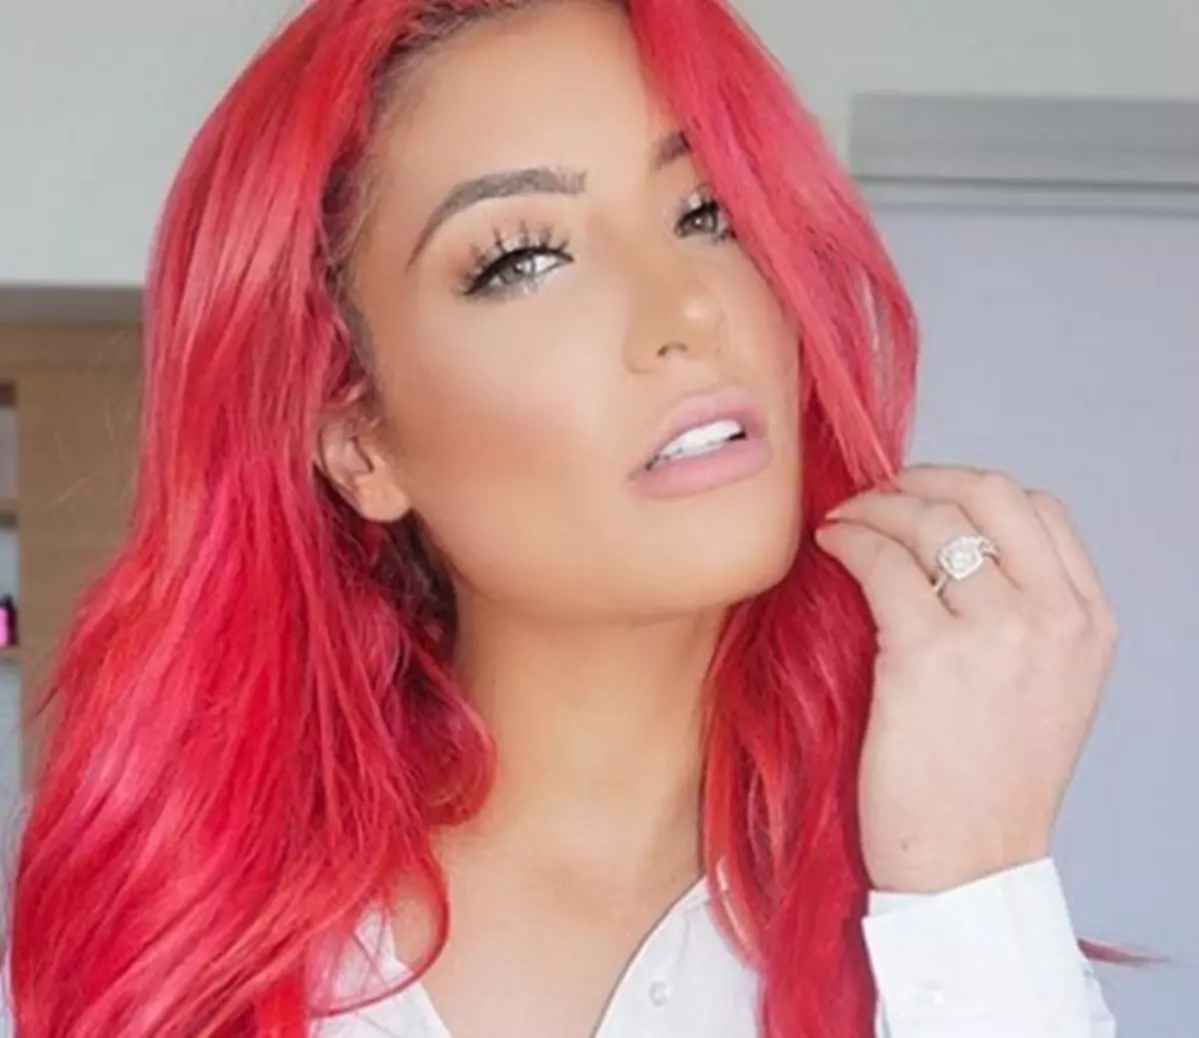 WWE diva Eva Marie recently posted a photo of herself on Instagram and some...